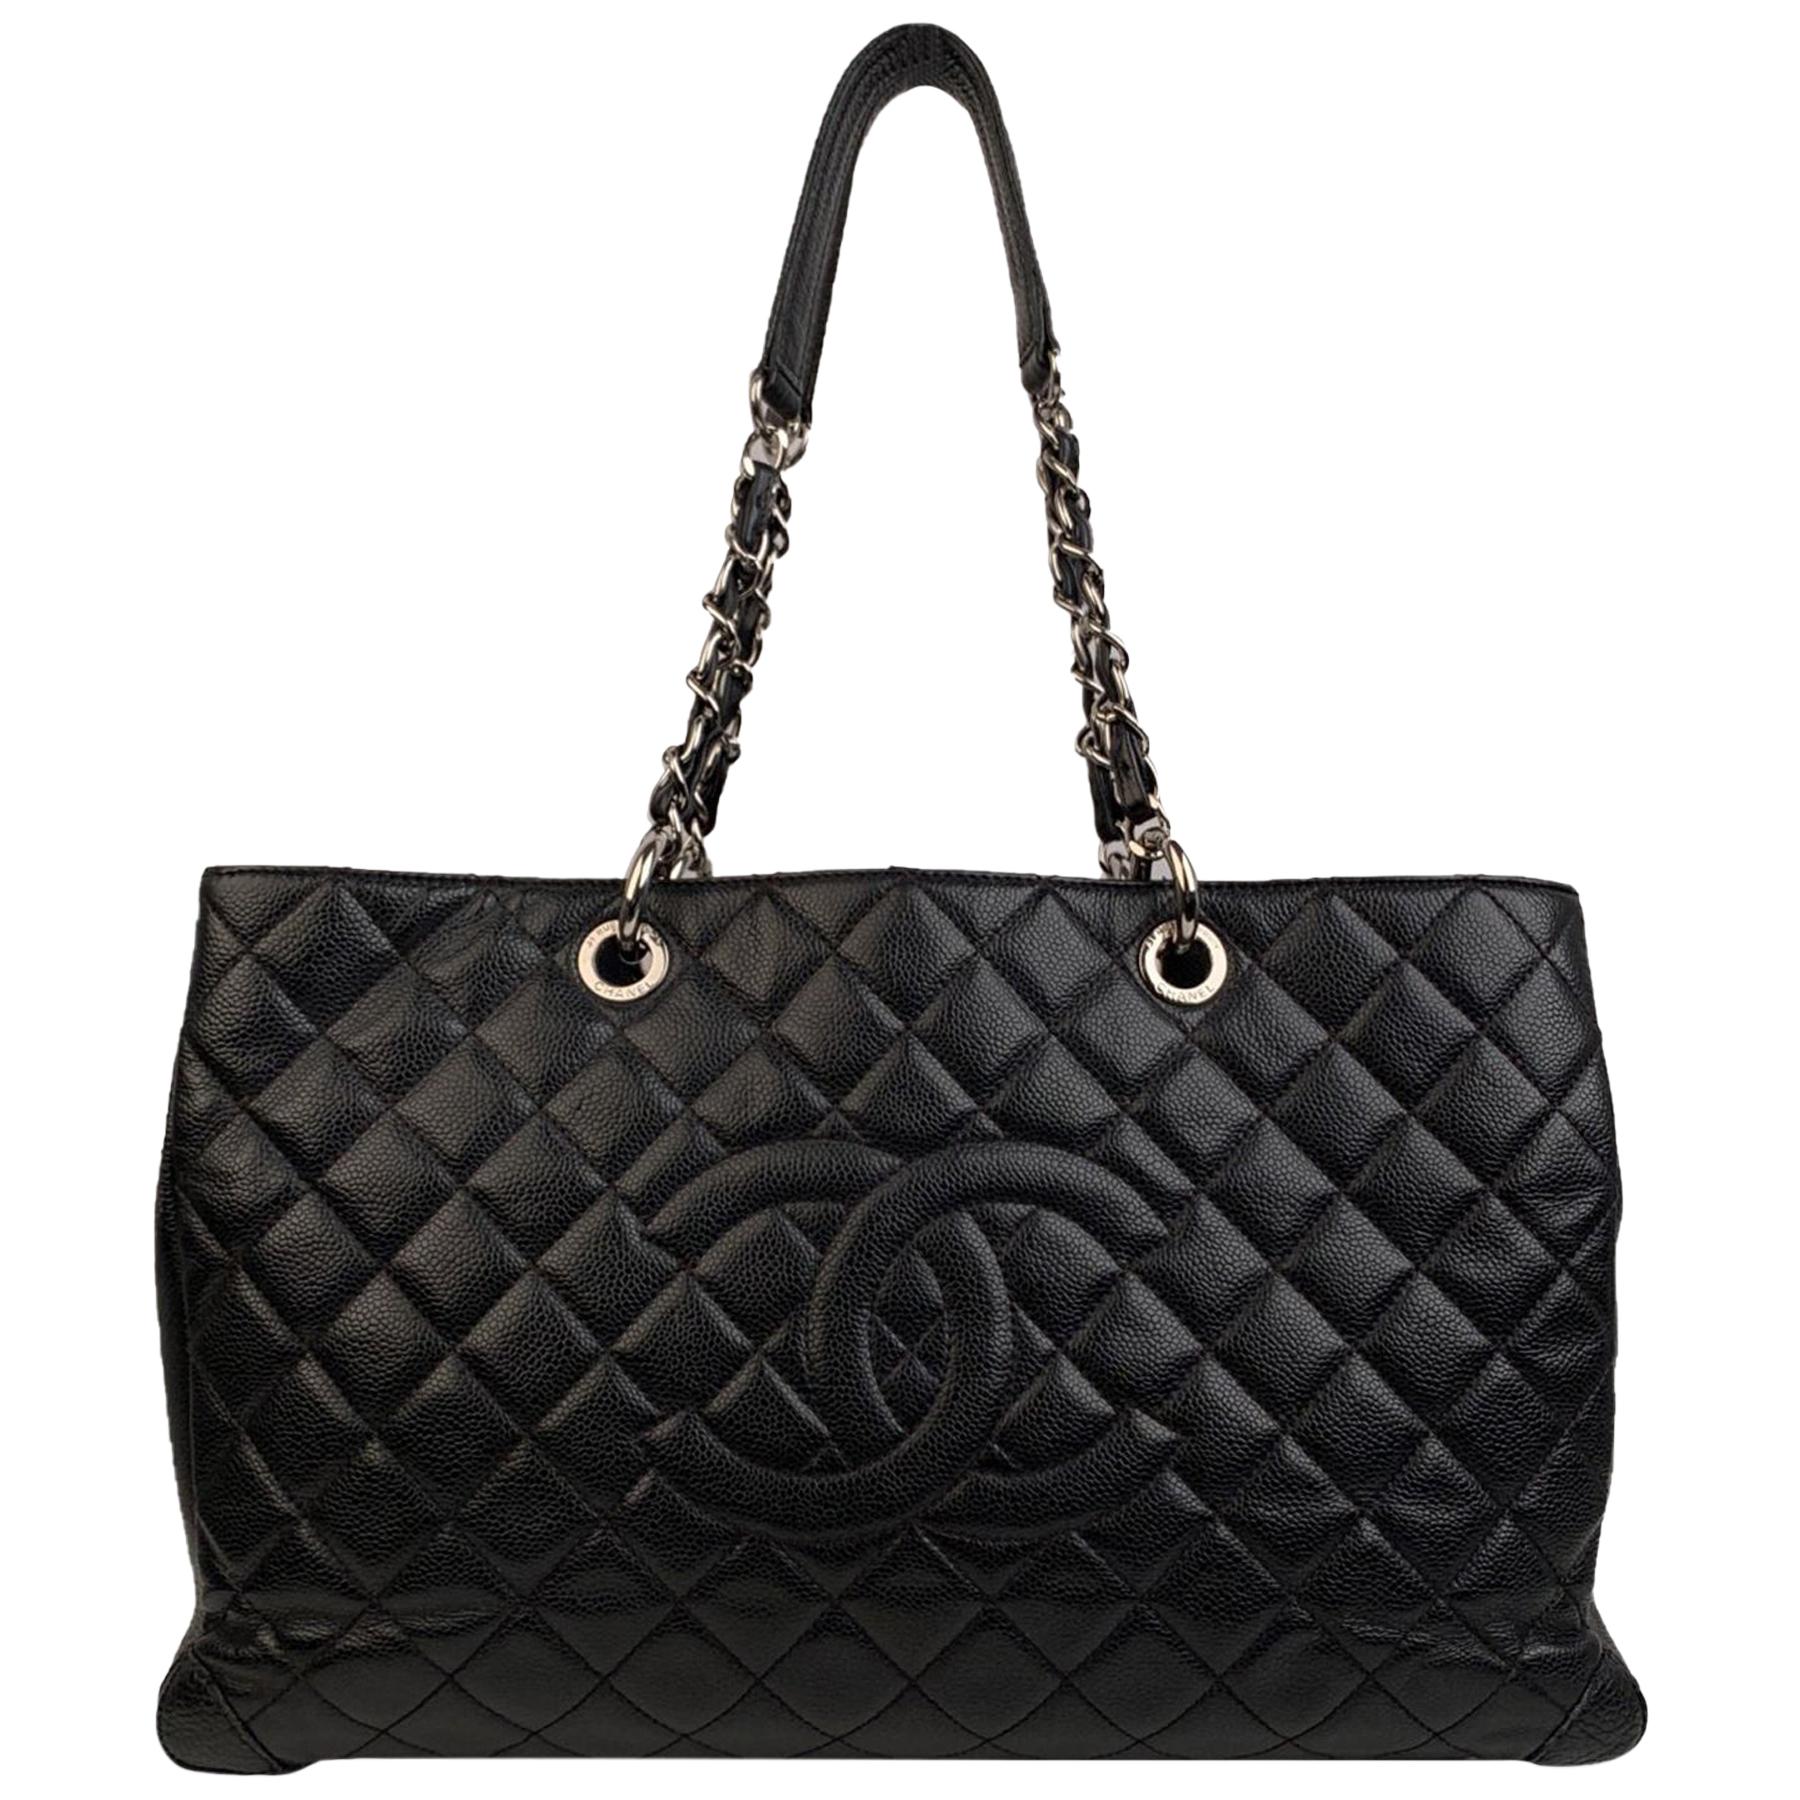 Chanel Black Caviar Quilted Leather Grand Shopping Tote GST Bag